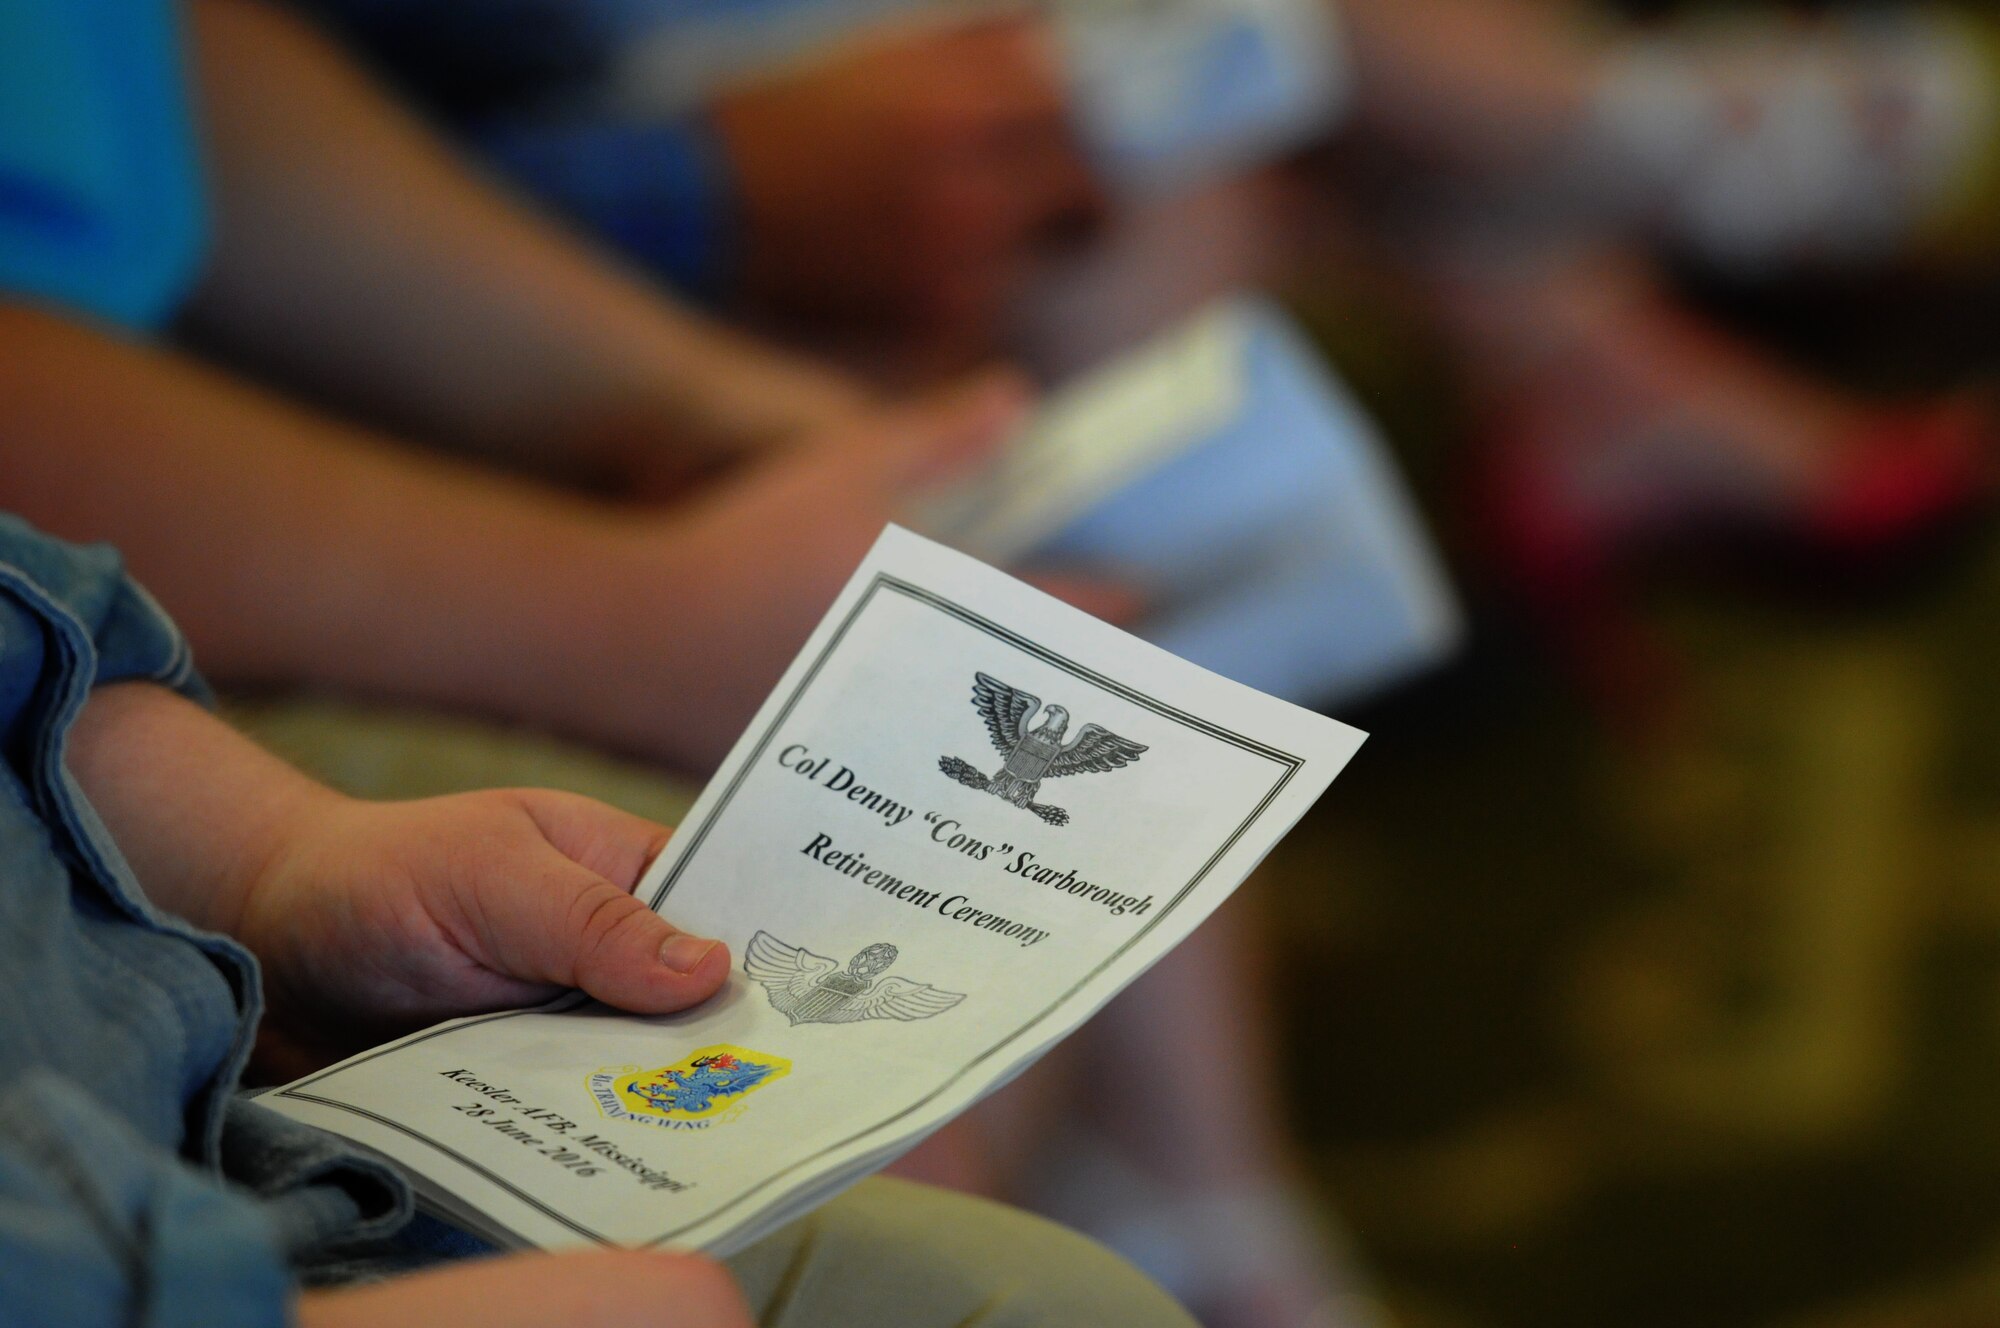 An event program is held by an attendee during the retirement ceremony for Col. Dennis Scarborough, 81st Training Wing vice commander, at the Bay Breeze Event Center June 28, 2016, on Keesler Air Force Base, Miss. Scarborough retired with 27 years of military service. He has served multiple tours as an F-15C instructor and evaluator and has held positions in the fields of defense policy, operational plans, safety and aircraft maintenance. He has commanded at the squadron level and served as an operations group deputy commander. (U.S. Air Force photo by Kemberly Groue/Released)